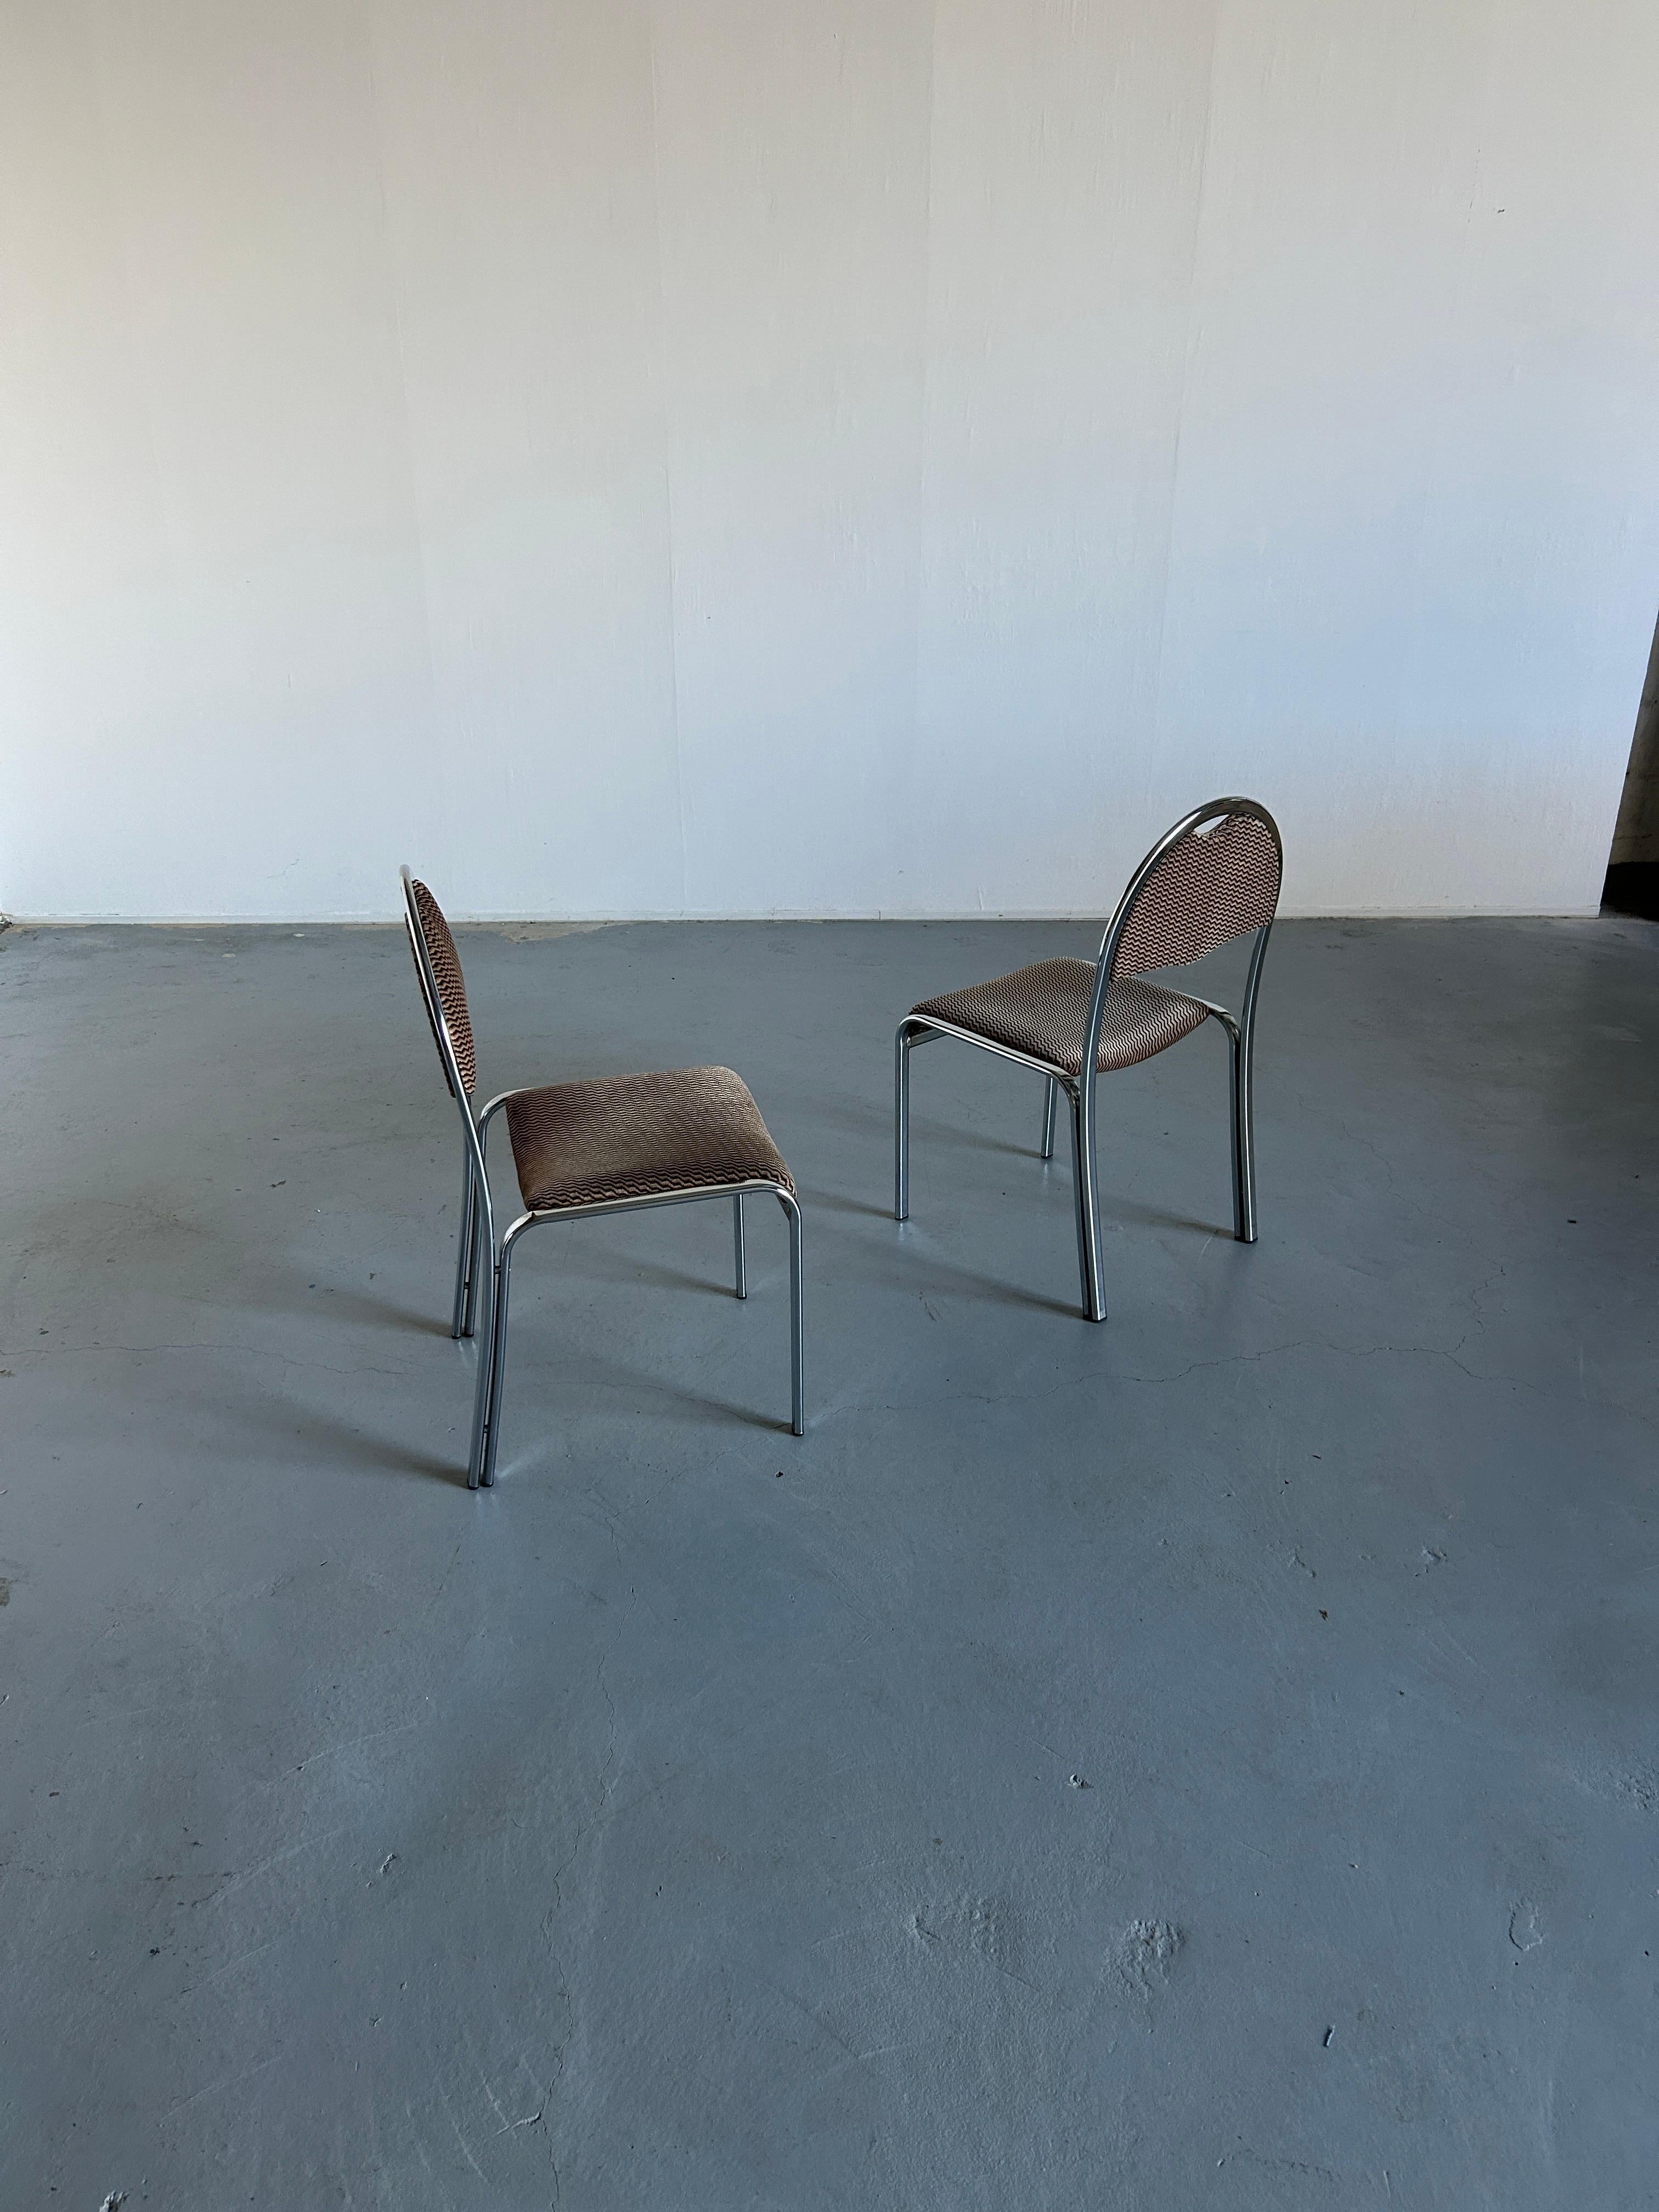 Pair of Vintage Mid-Century Modern Dining Chairs In Style of Saporiti, 70s Italy For Sale 3